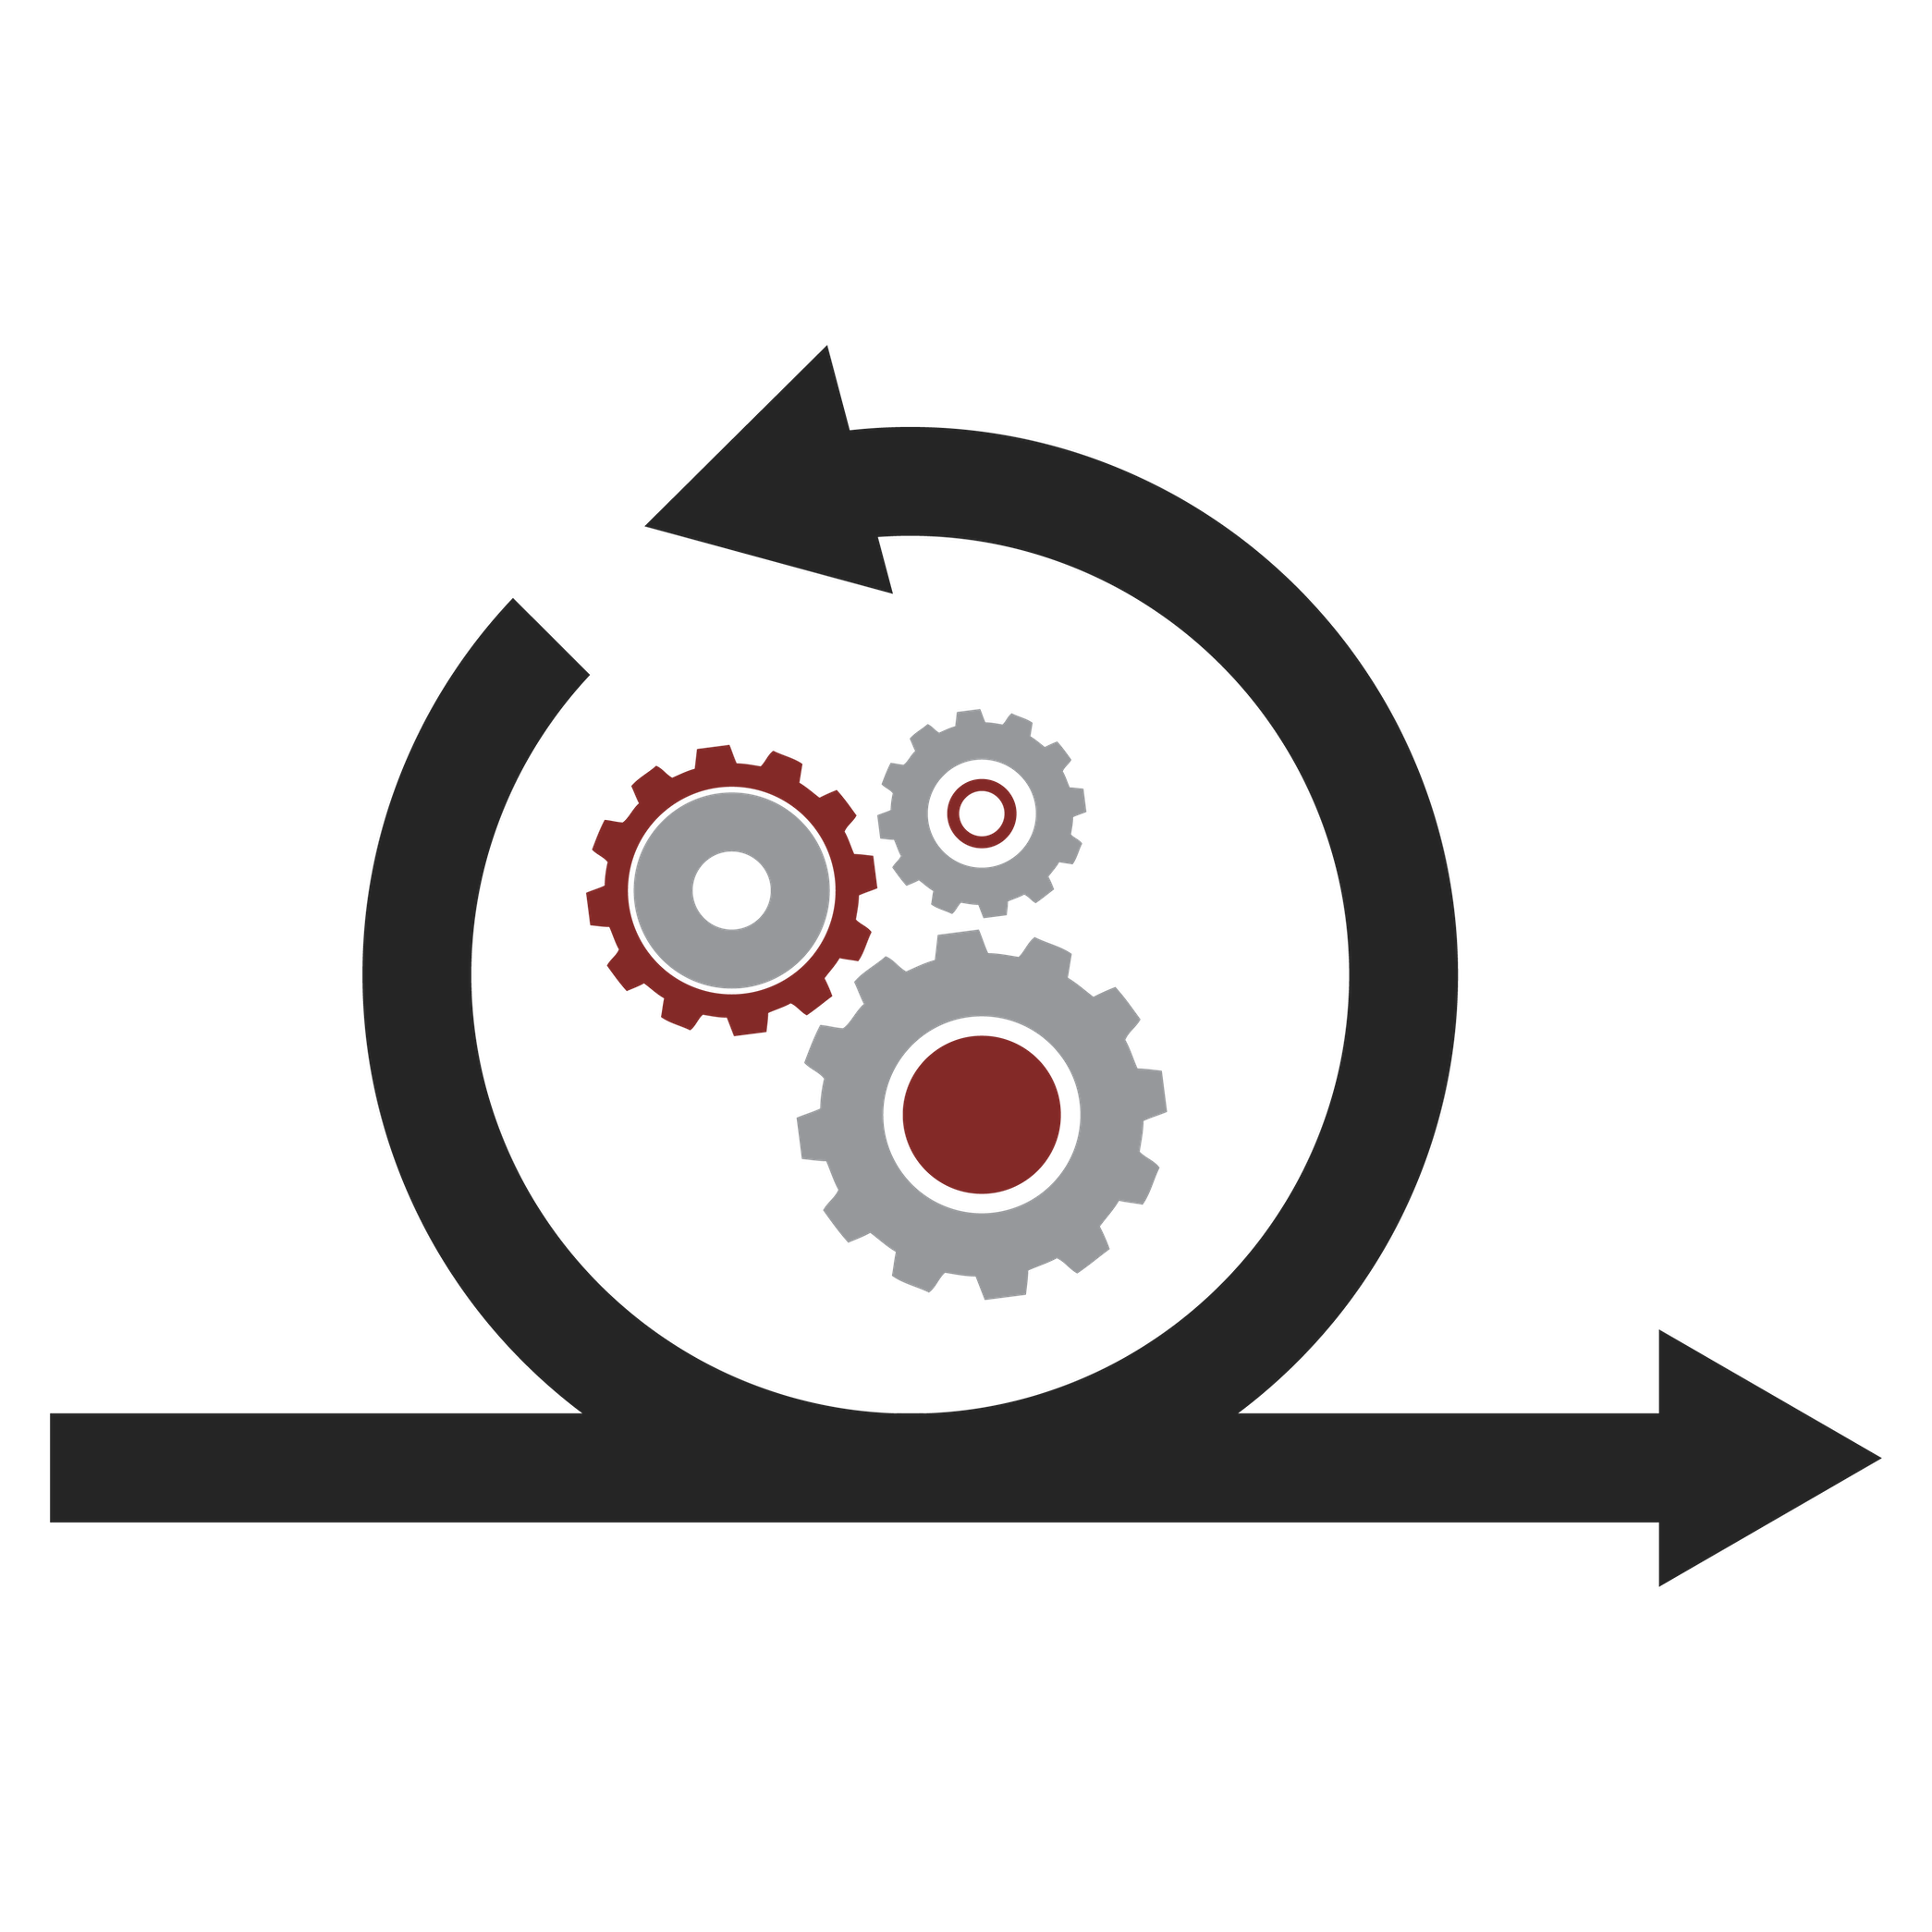 The cycle icon for medical device development cycle